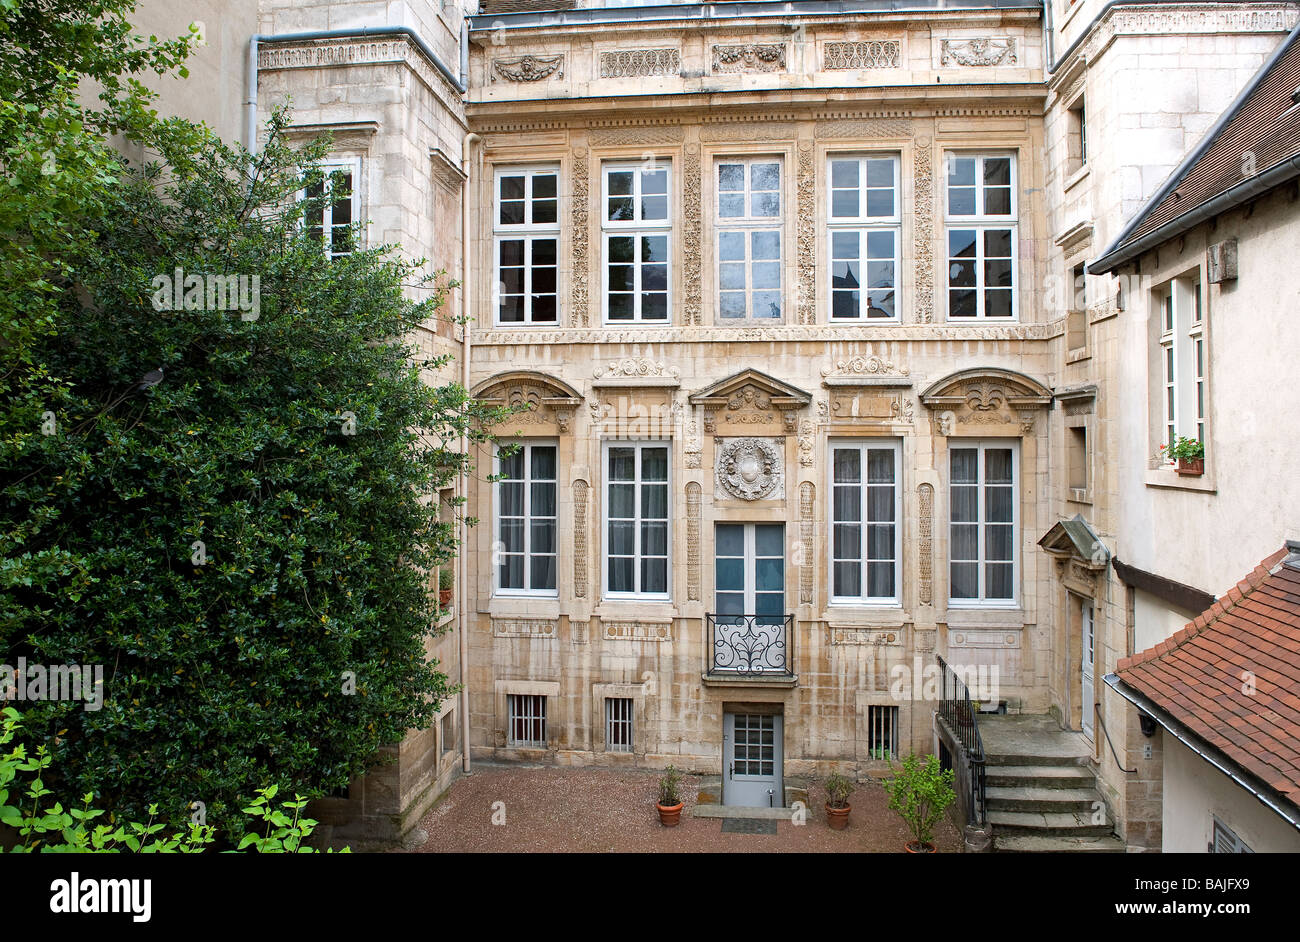 France, Cote d'Or, Dijon, Fyot of Mimeur Hotel, rue Amiral Roussin (Amiral Roussin Street) Stock Photo